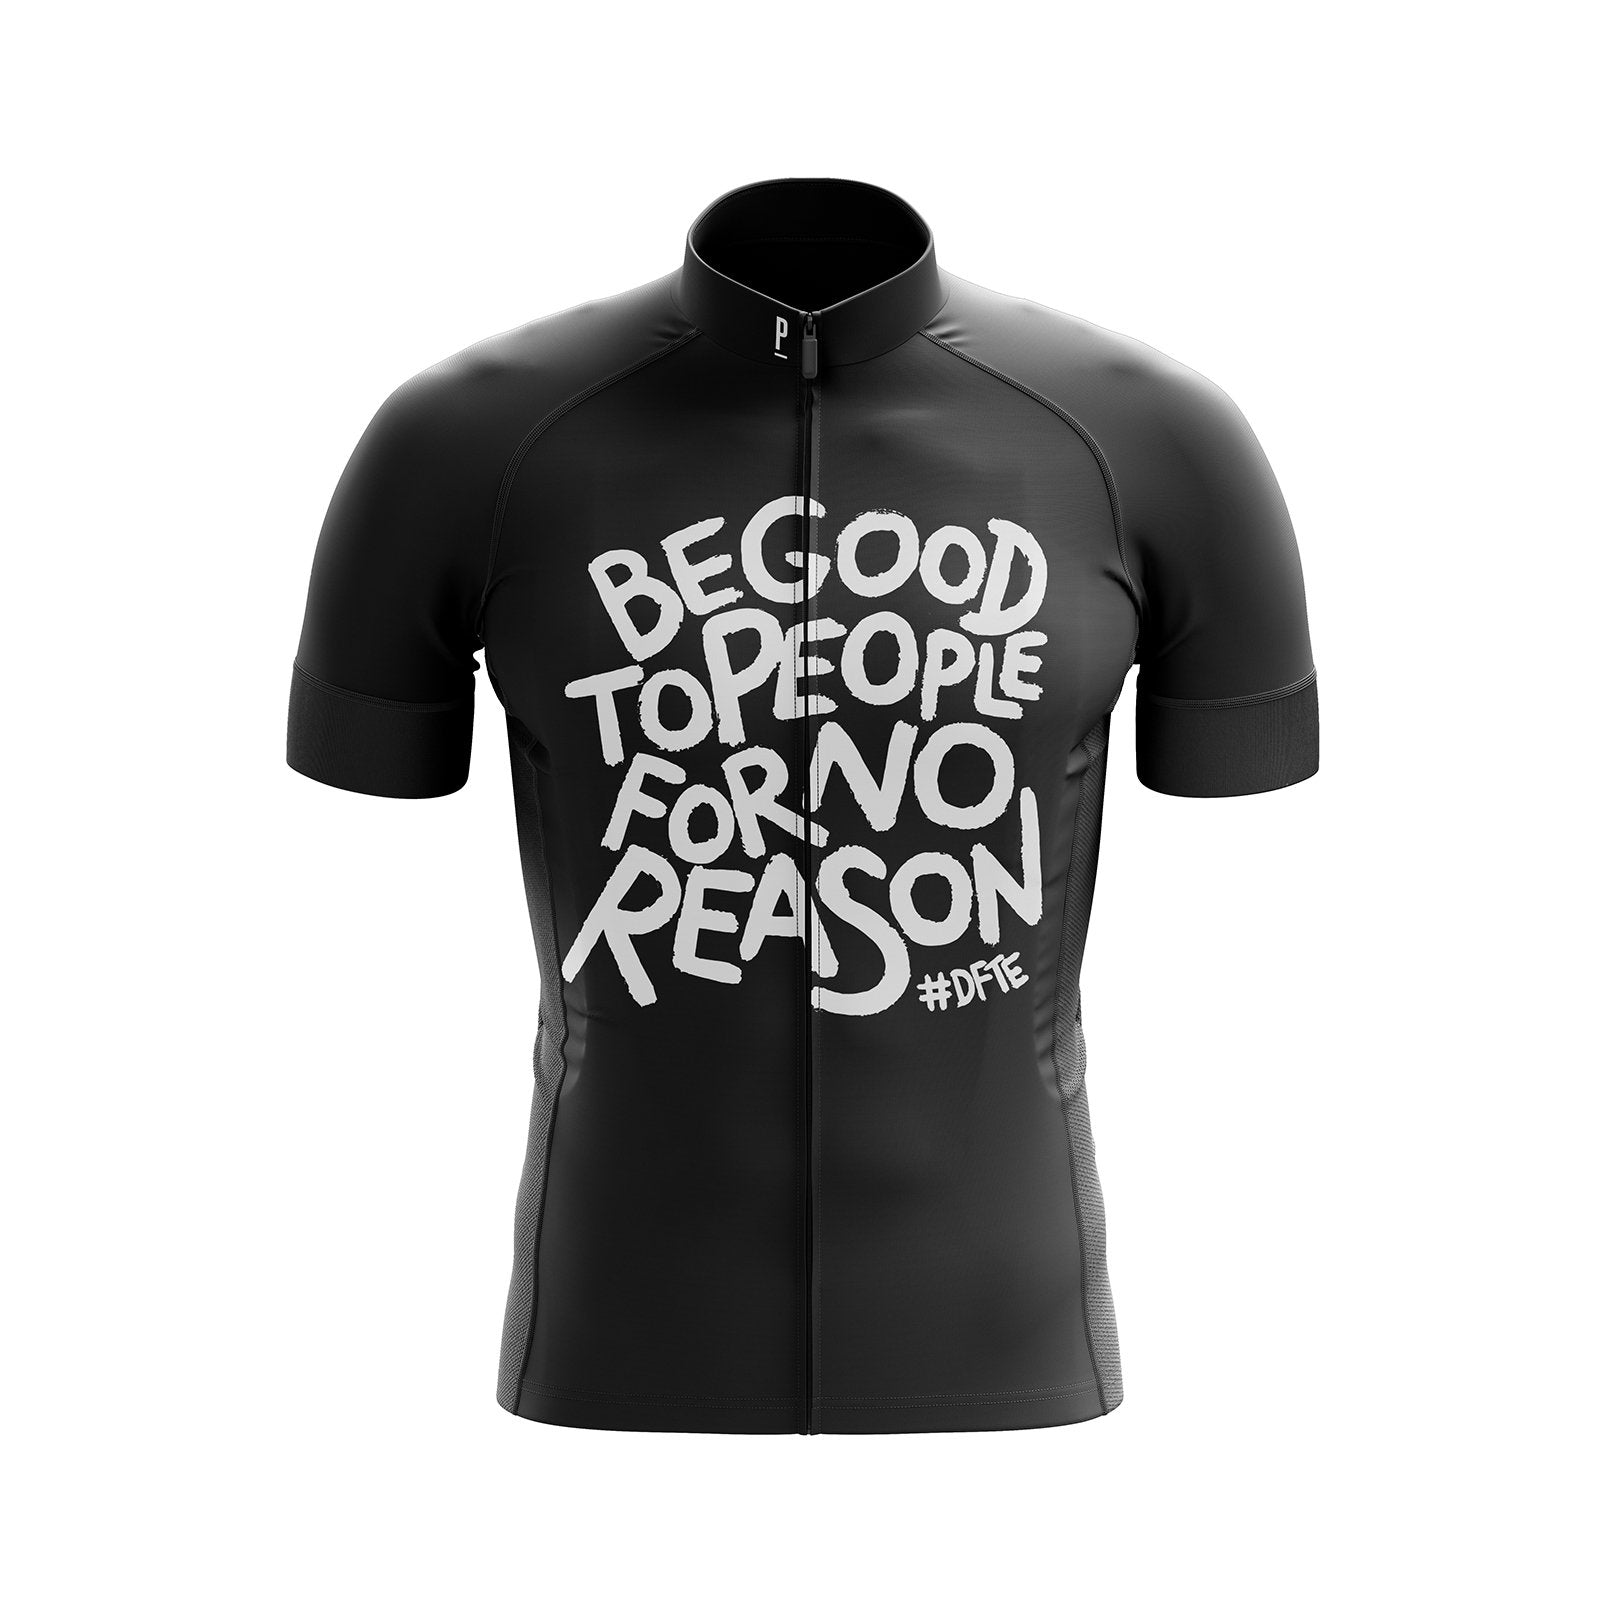 DFTE Cycling Jersey-PARIA.CC DFTE MEN'S CYCLING JERSEY